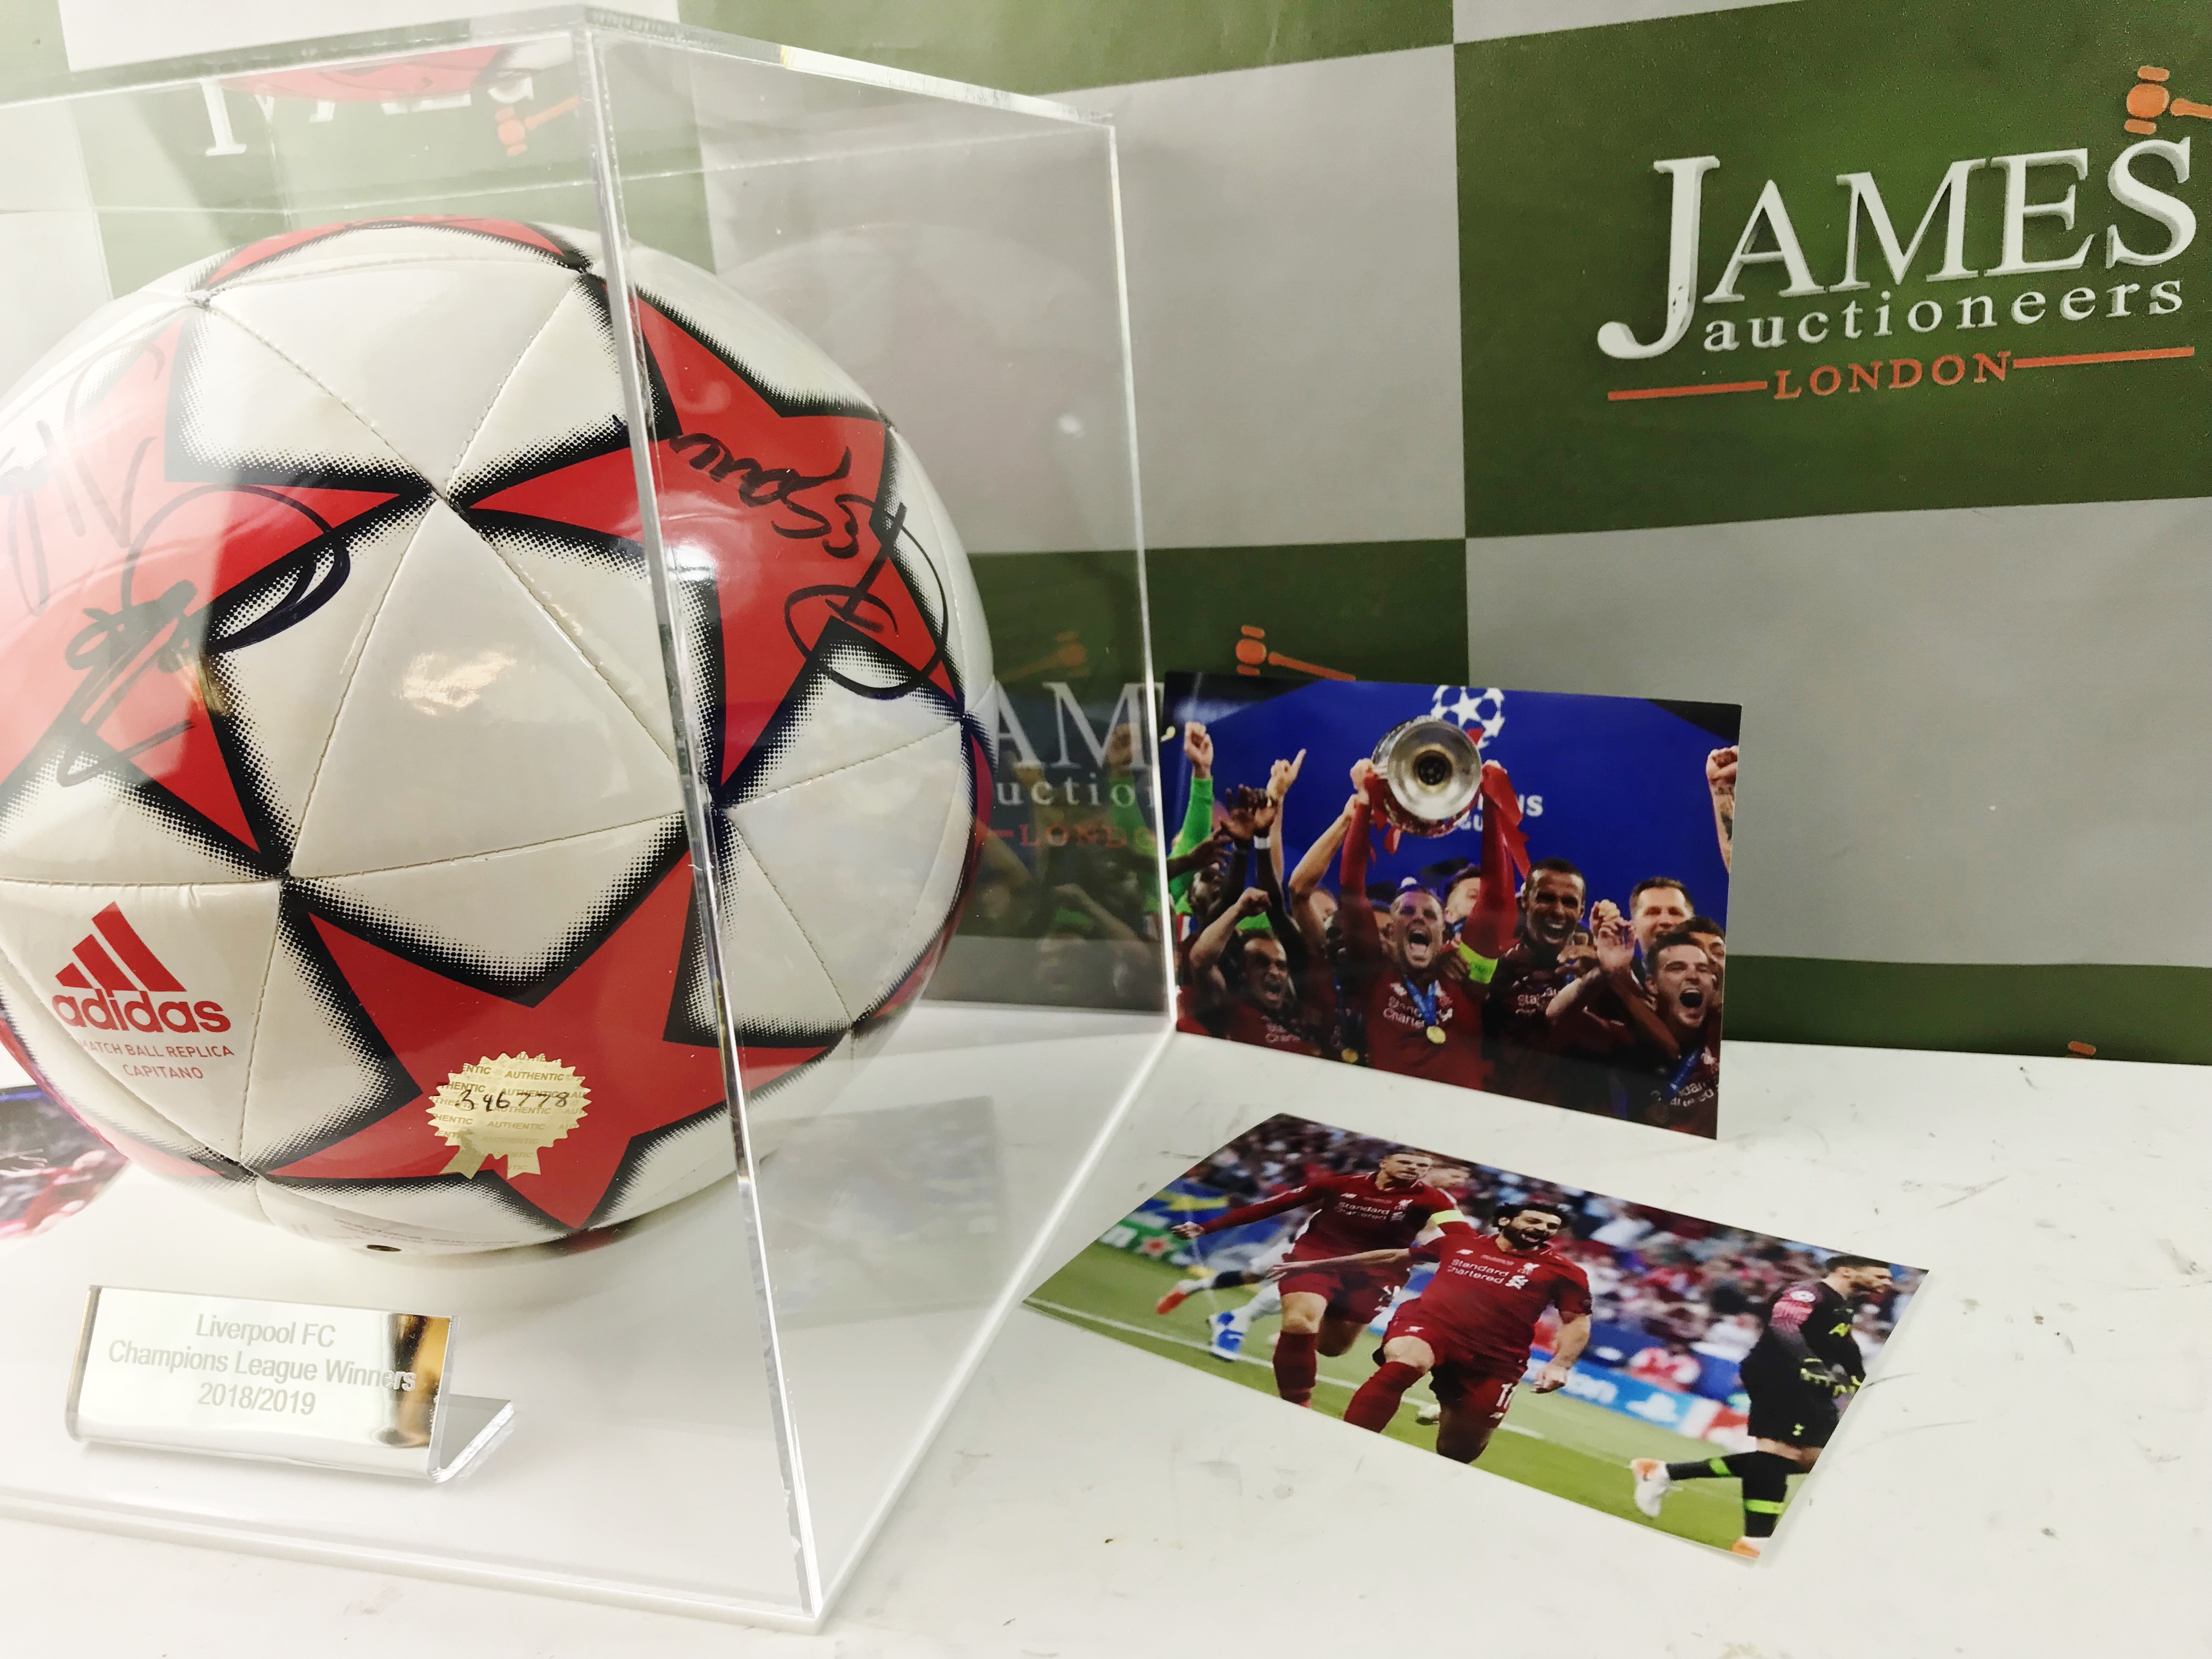 Liverpool FC Champions League Winner 2019 Signed Football & Case - Image 4 of 6